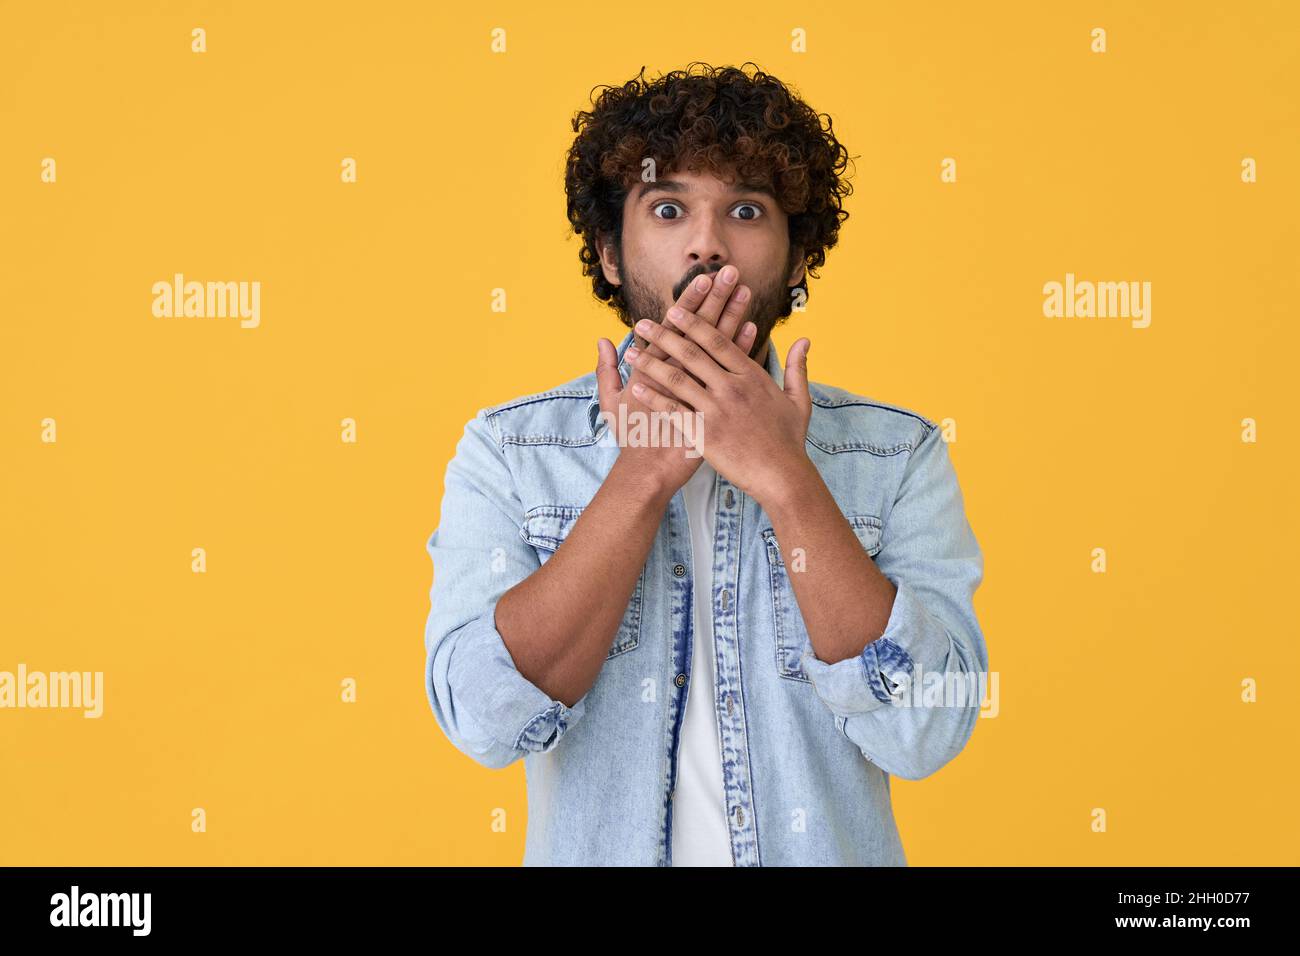 Shocked surprised young indian man isolated on yellow background. Stock Photo